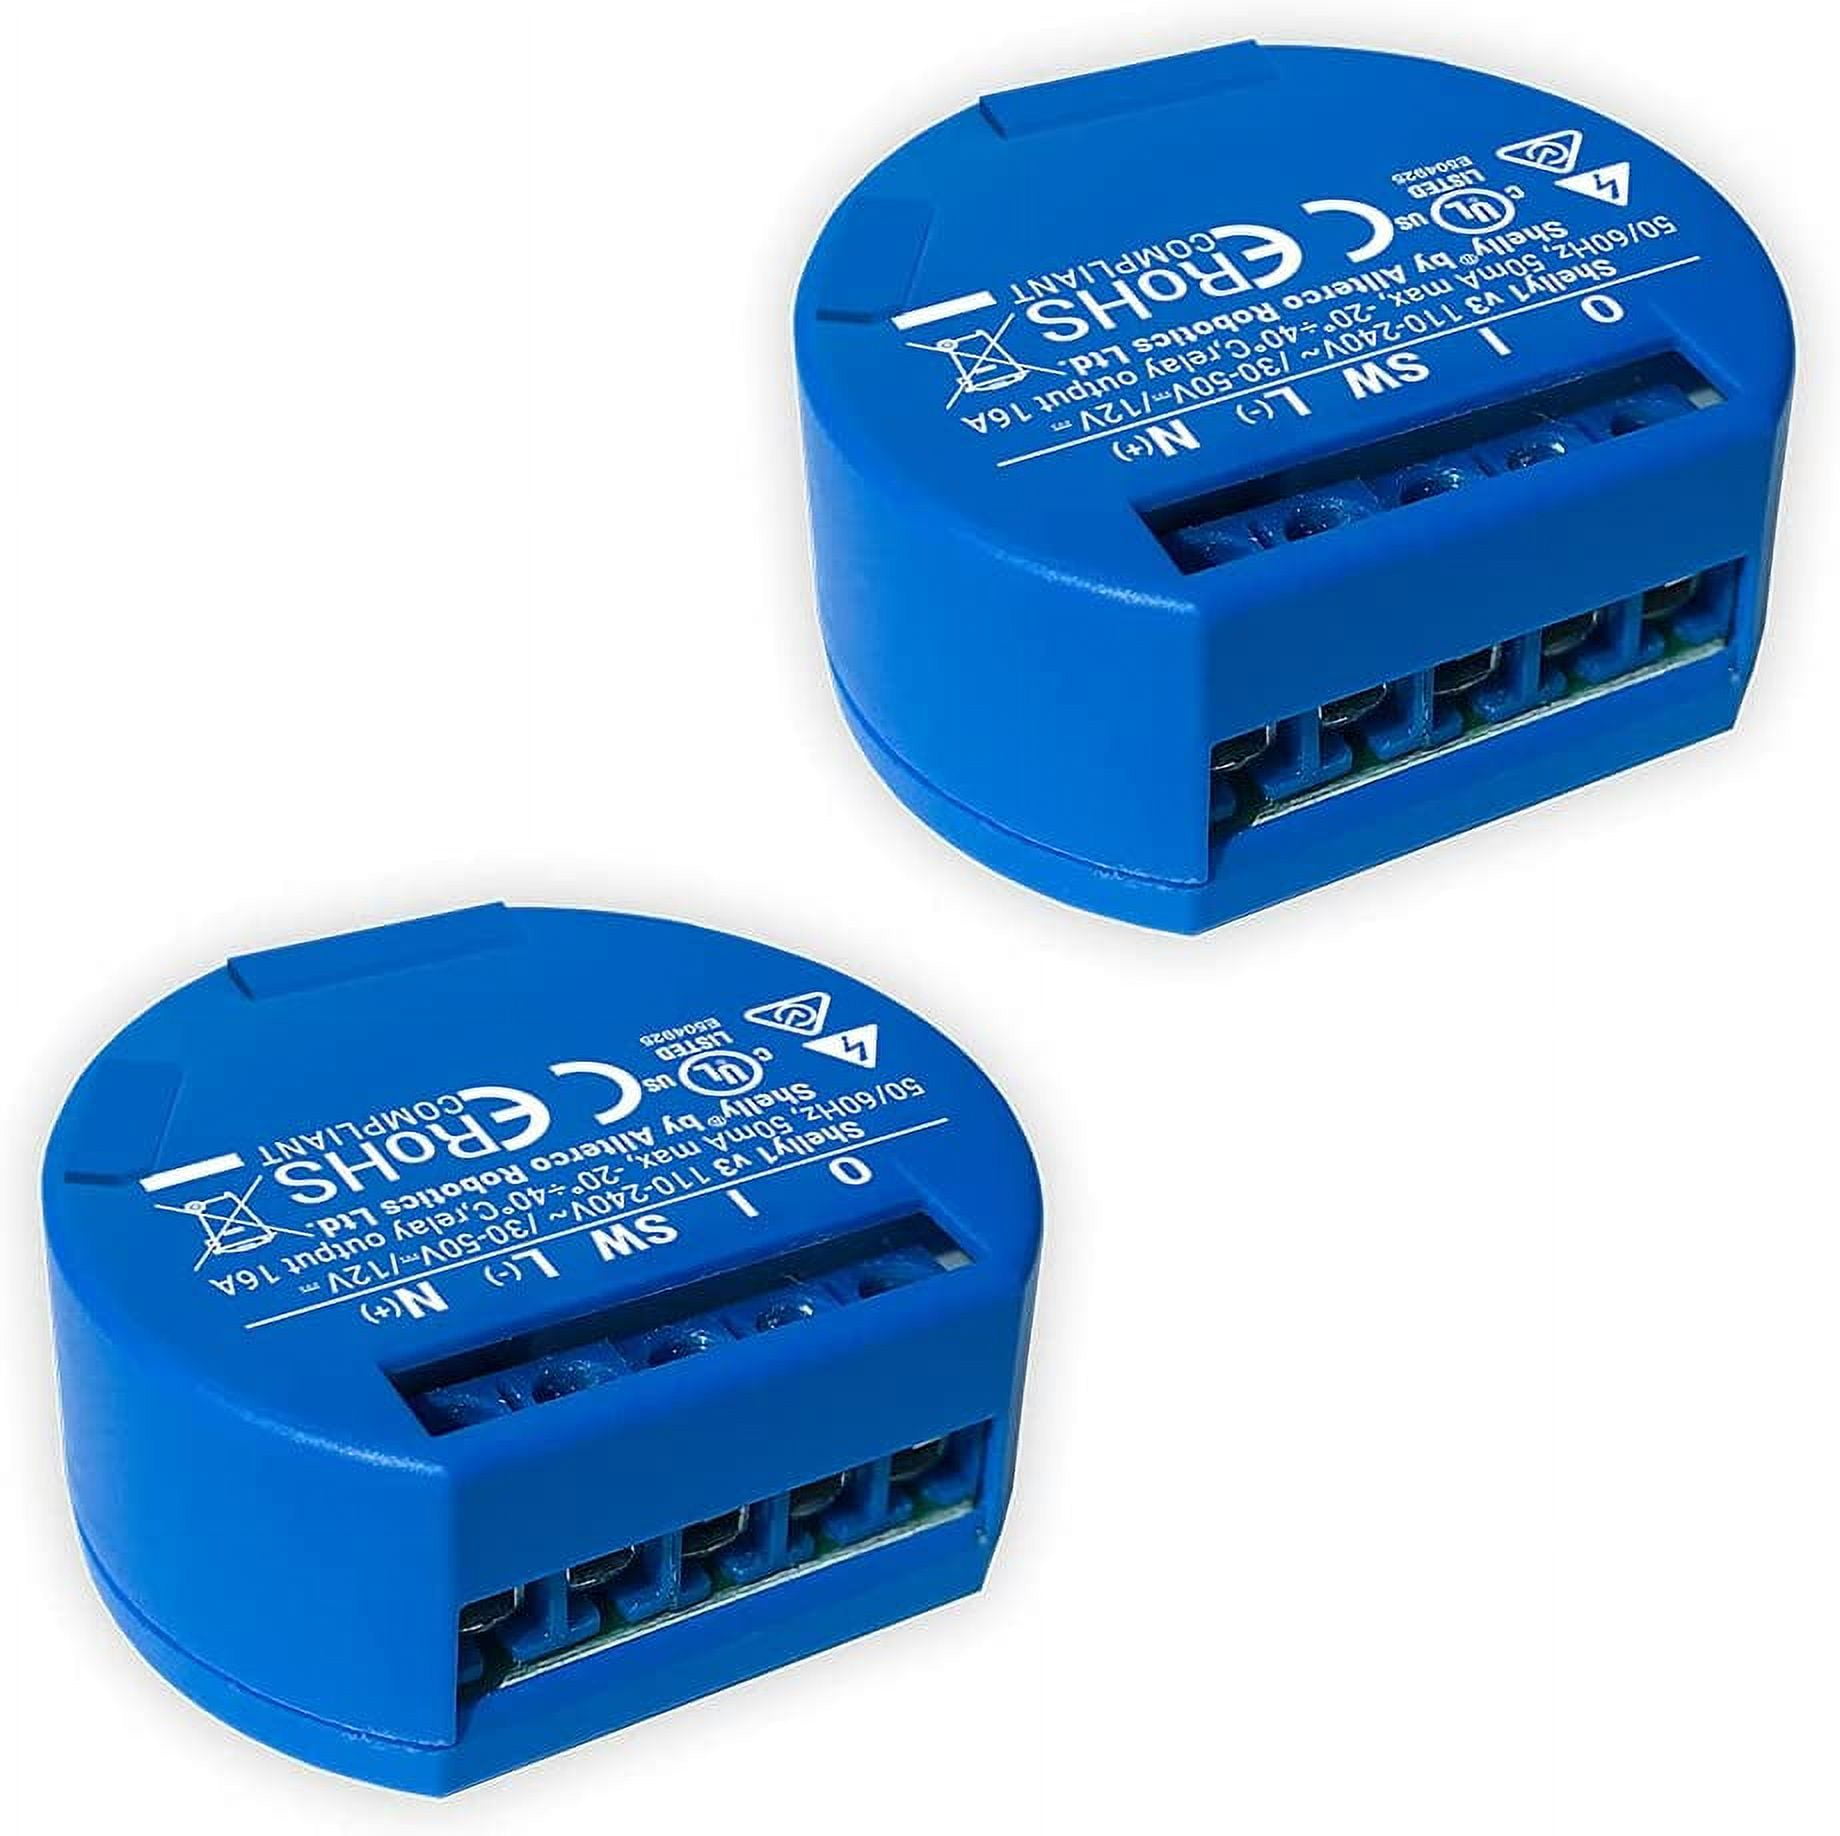 Shelly Plus 1 UL (2 pack)